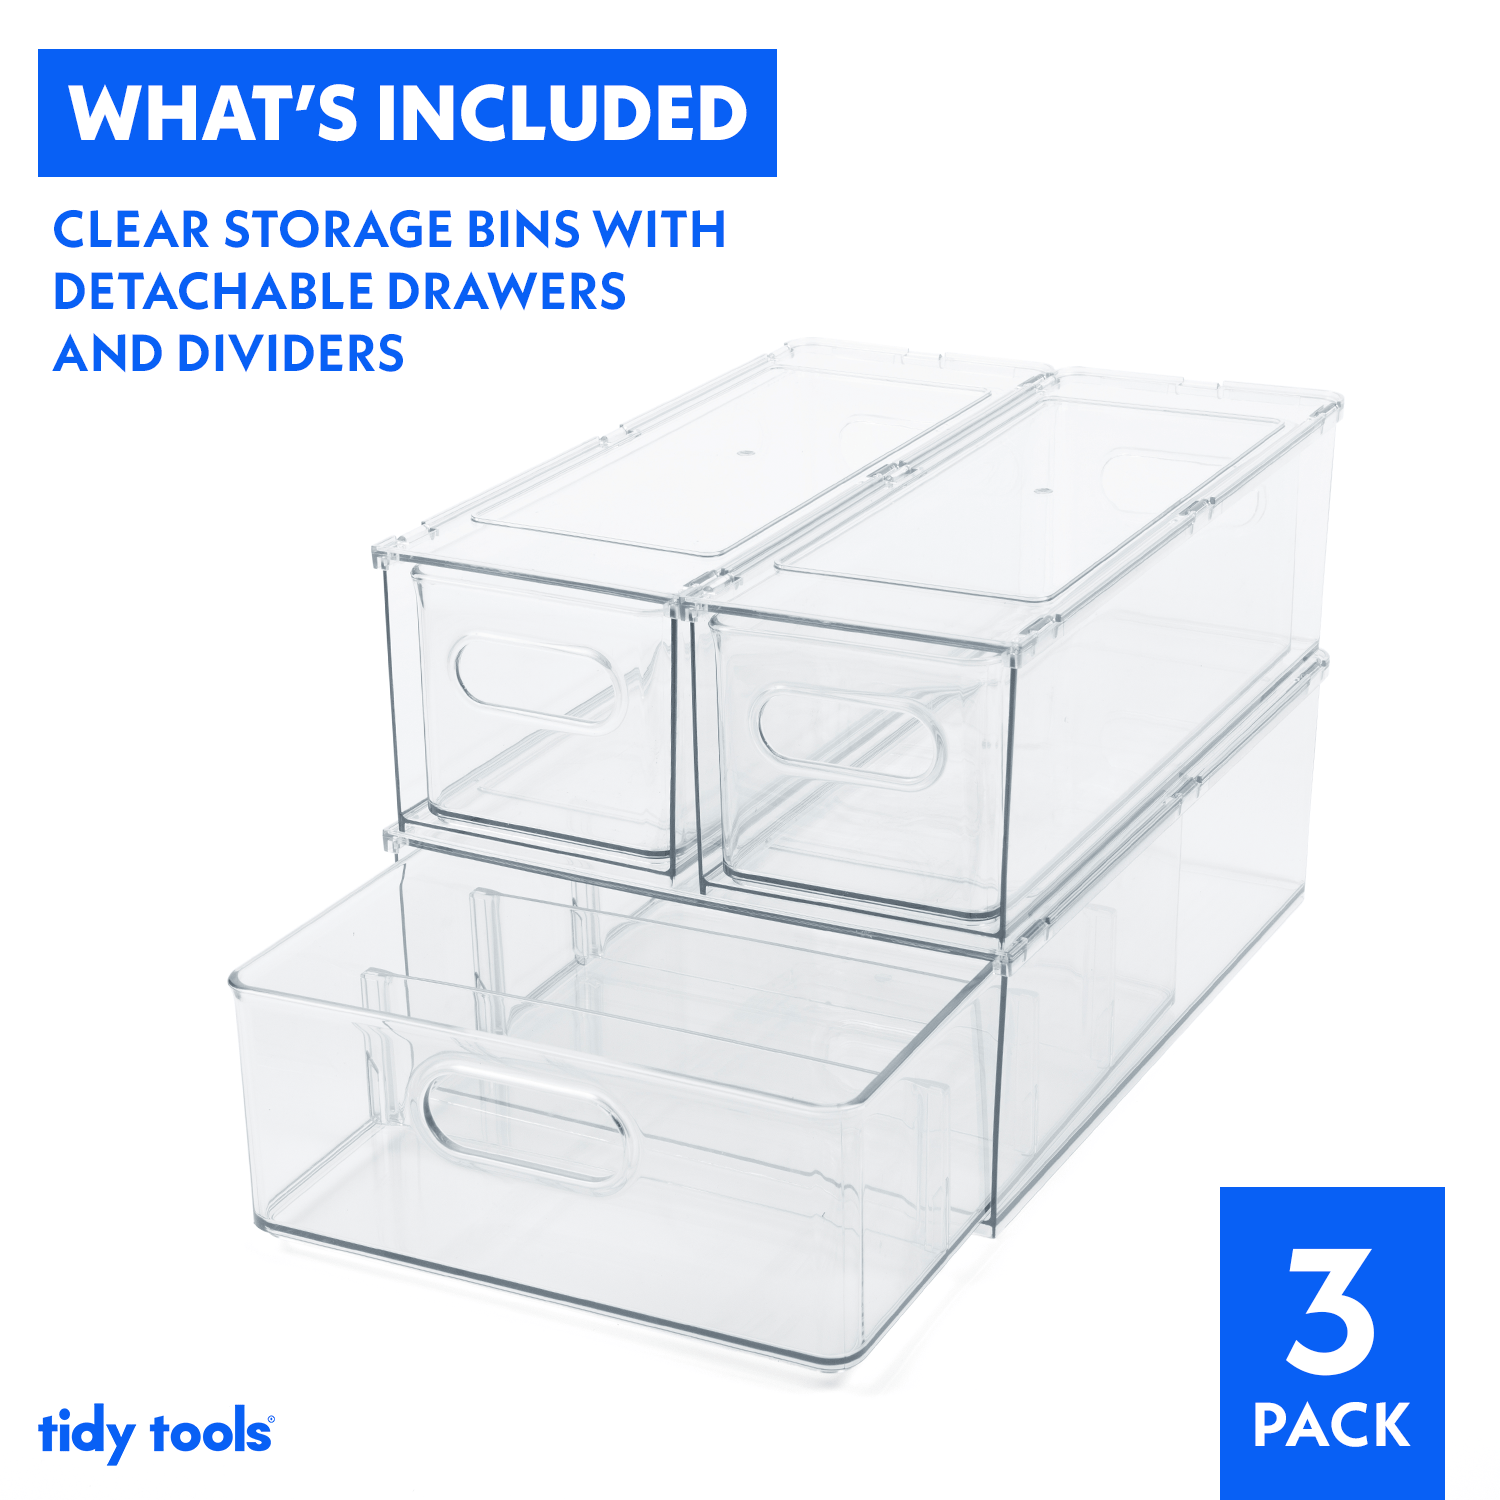 Tidy Tools Refrigerator Organizer Bins with Pull-out Drawer, Stackable, 3 Pack